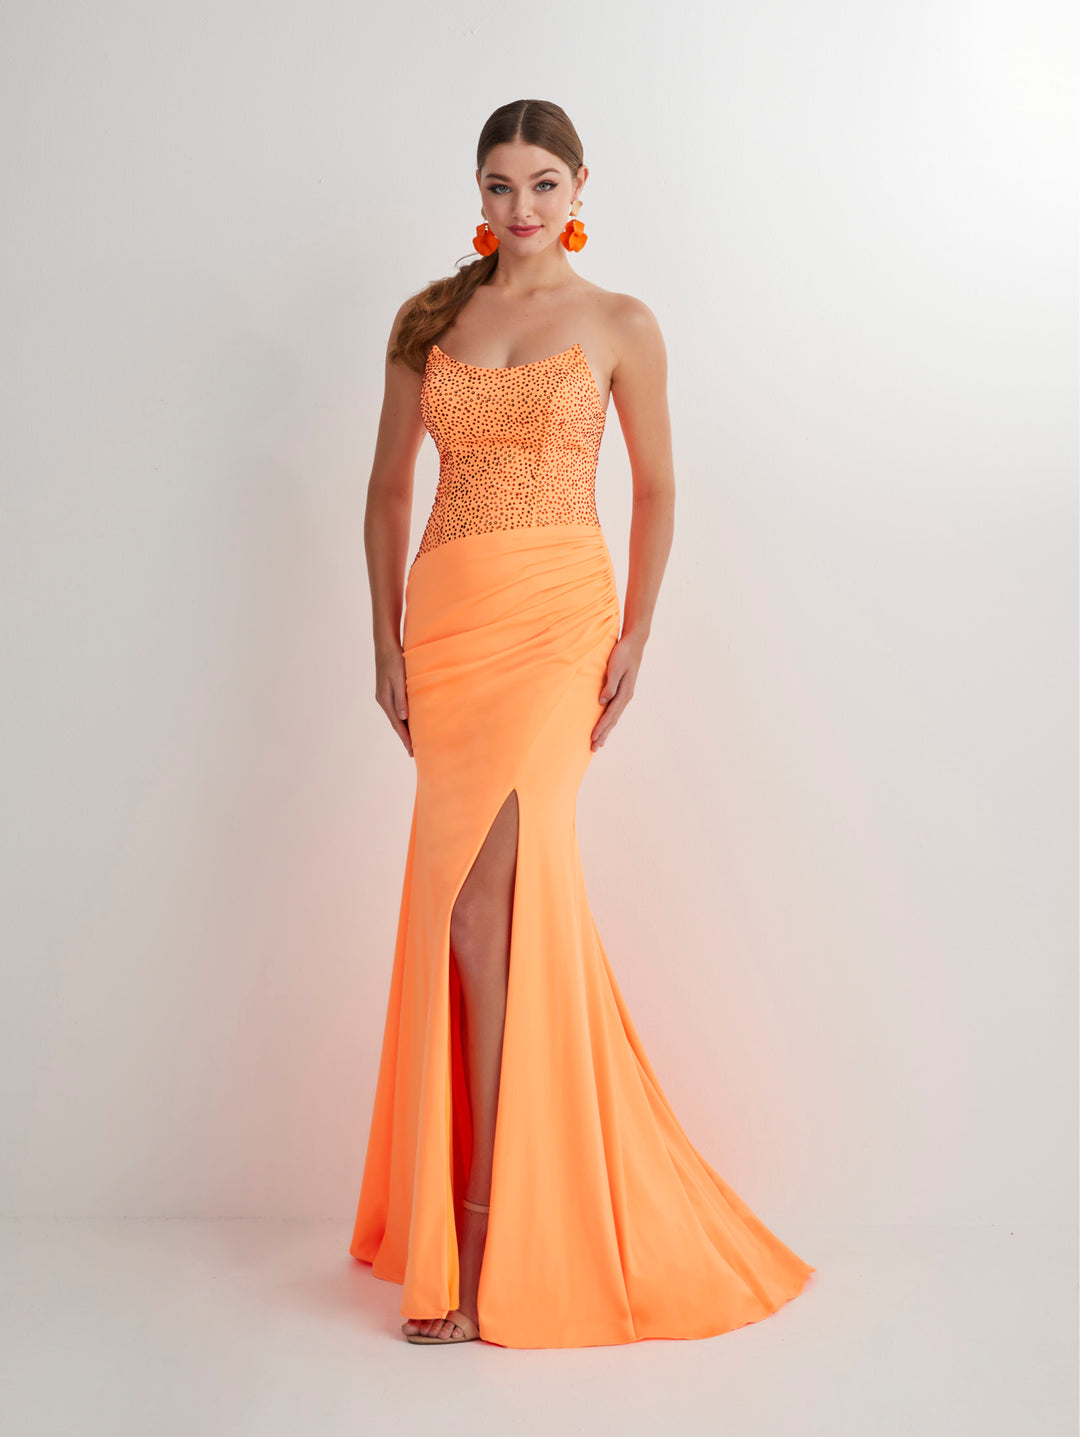 Beaded Spandex Strapless Slit Gown by Studio 17 12899